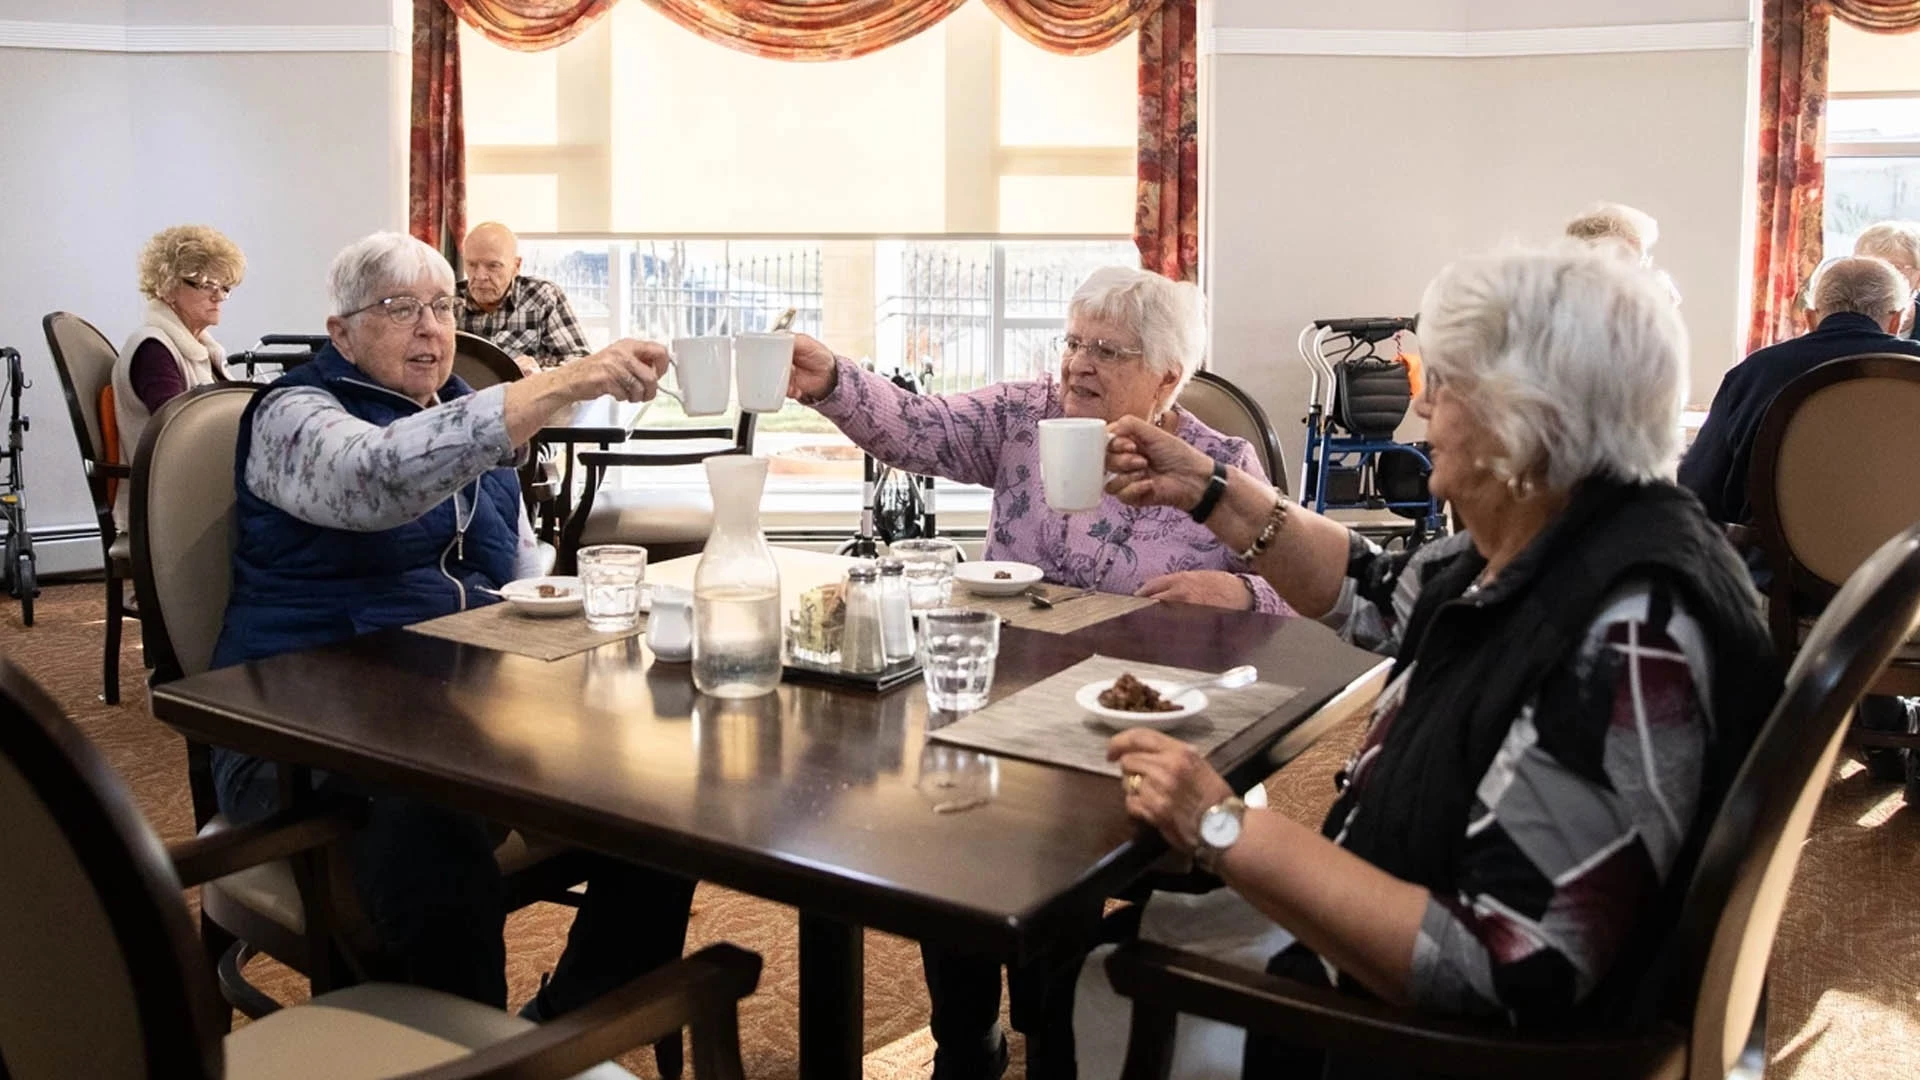 A group of older people sitting at a table in a dining room.